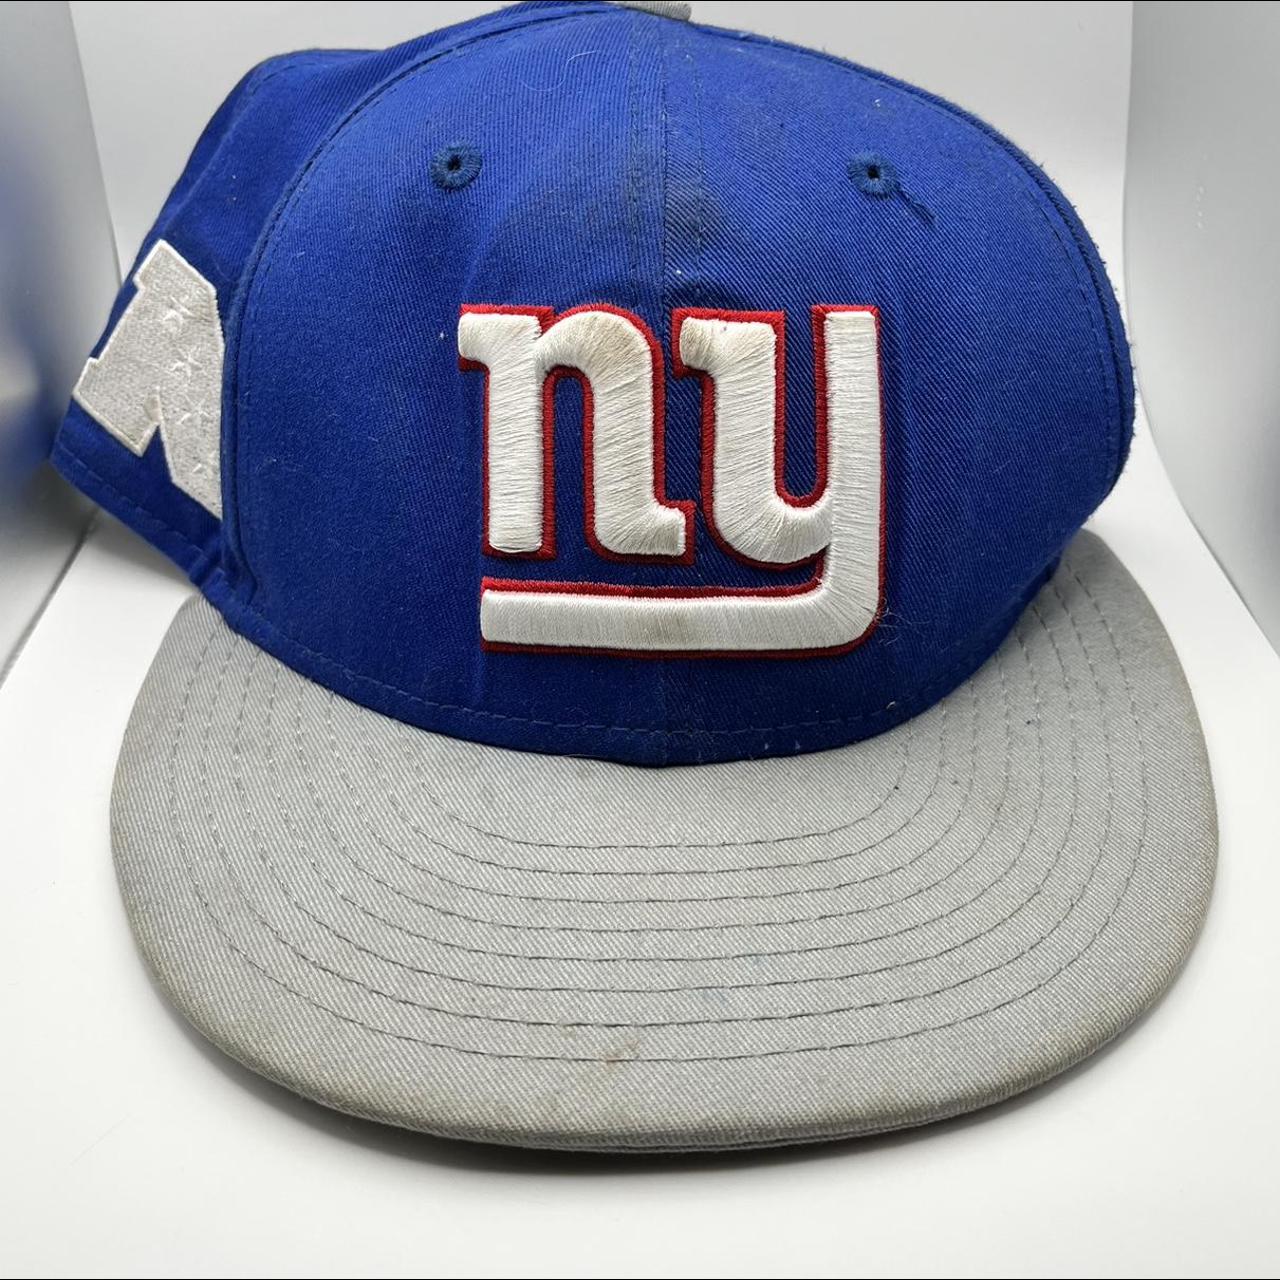 Vintage New York Giants Hat. This Cap is authentic